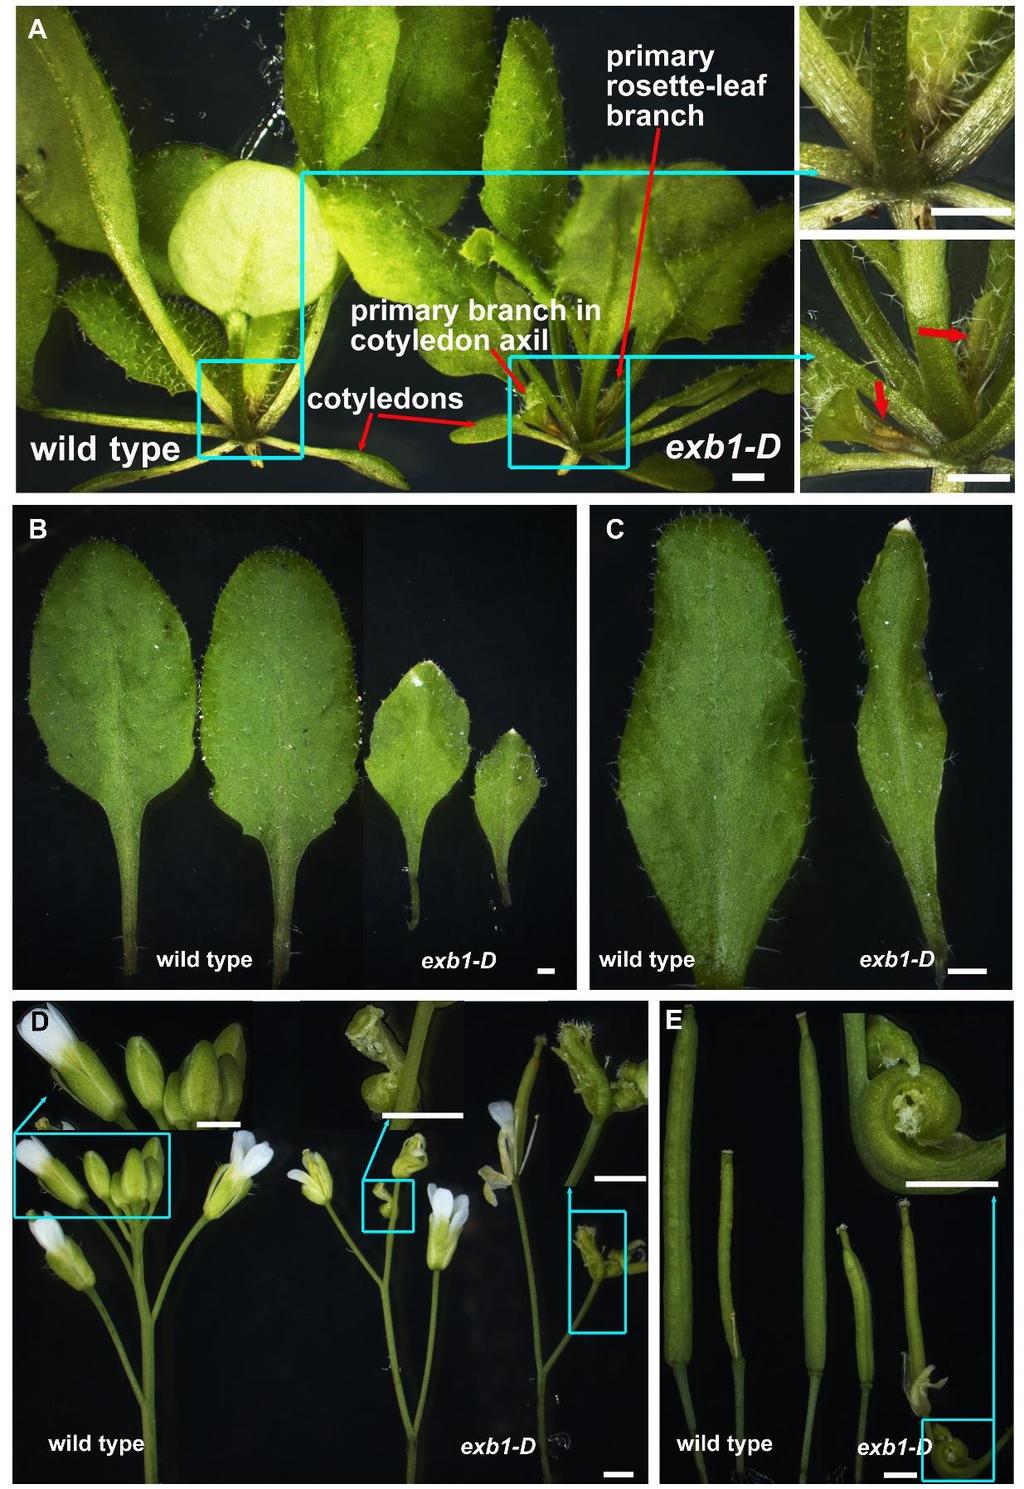 Supplemental Figure 1. The Mutant exb1-d Displayed Pleiotropic Phenotypes and Produced Branches in the Axils of Cotyledons. (A) Branches were developed in exb1-d but not in wild-type plants.